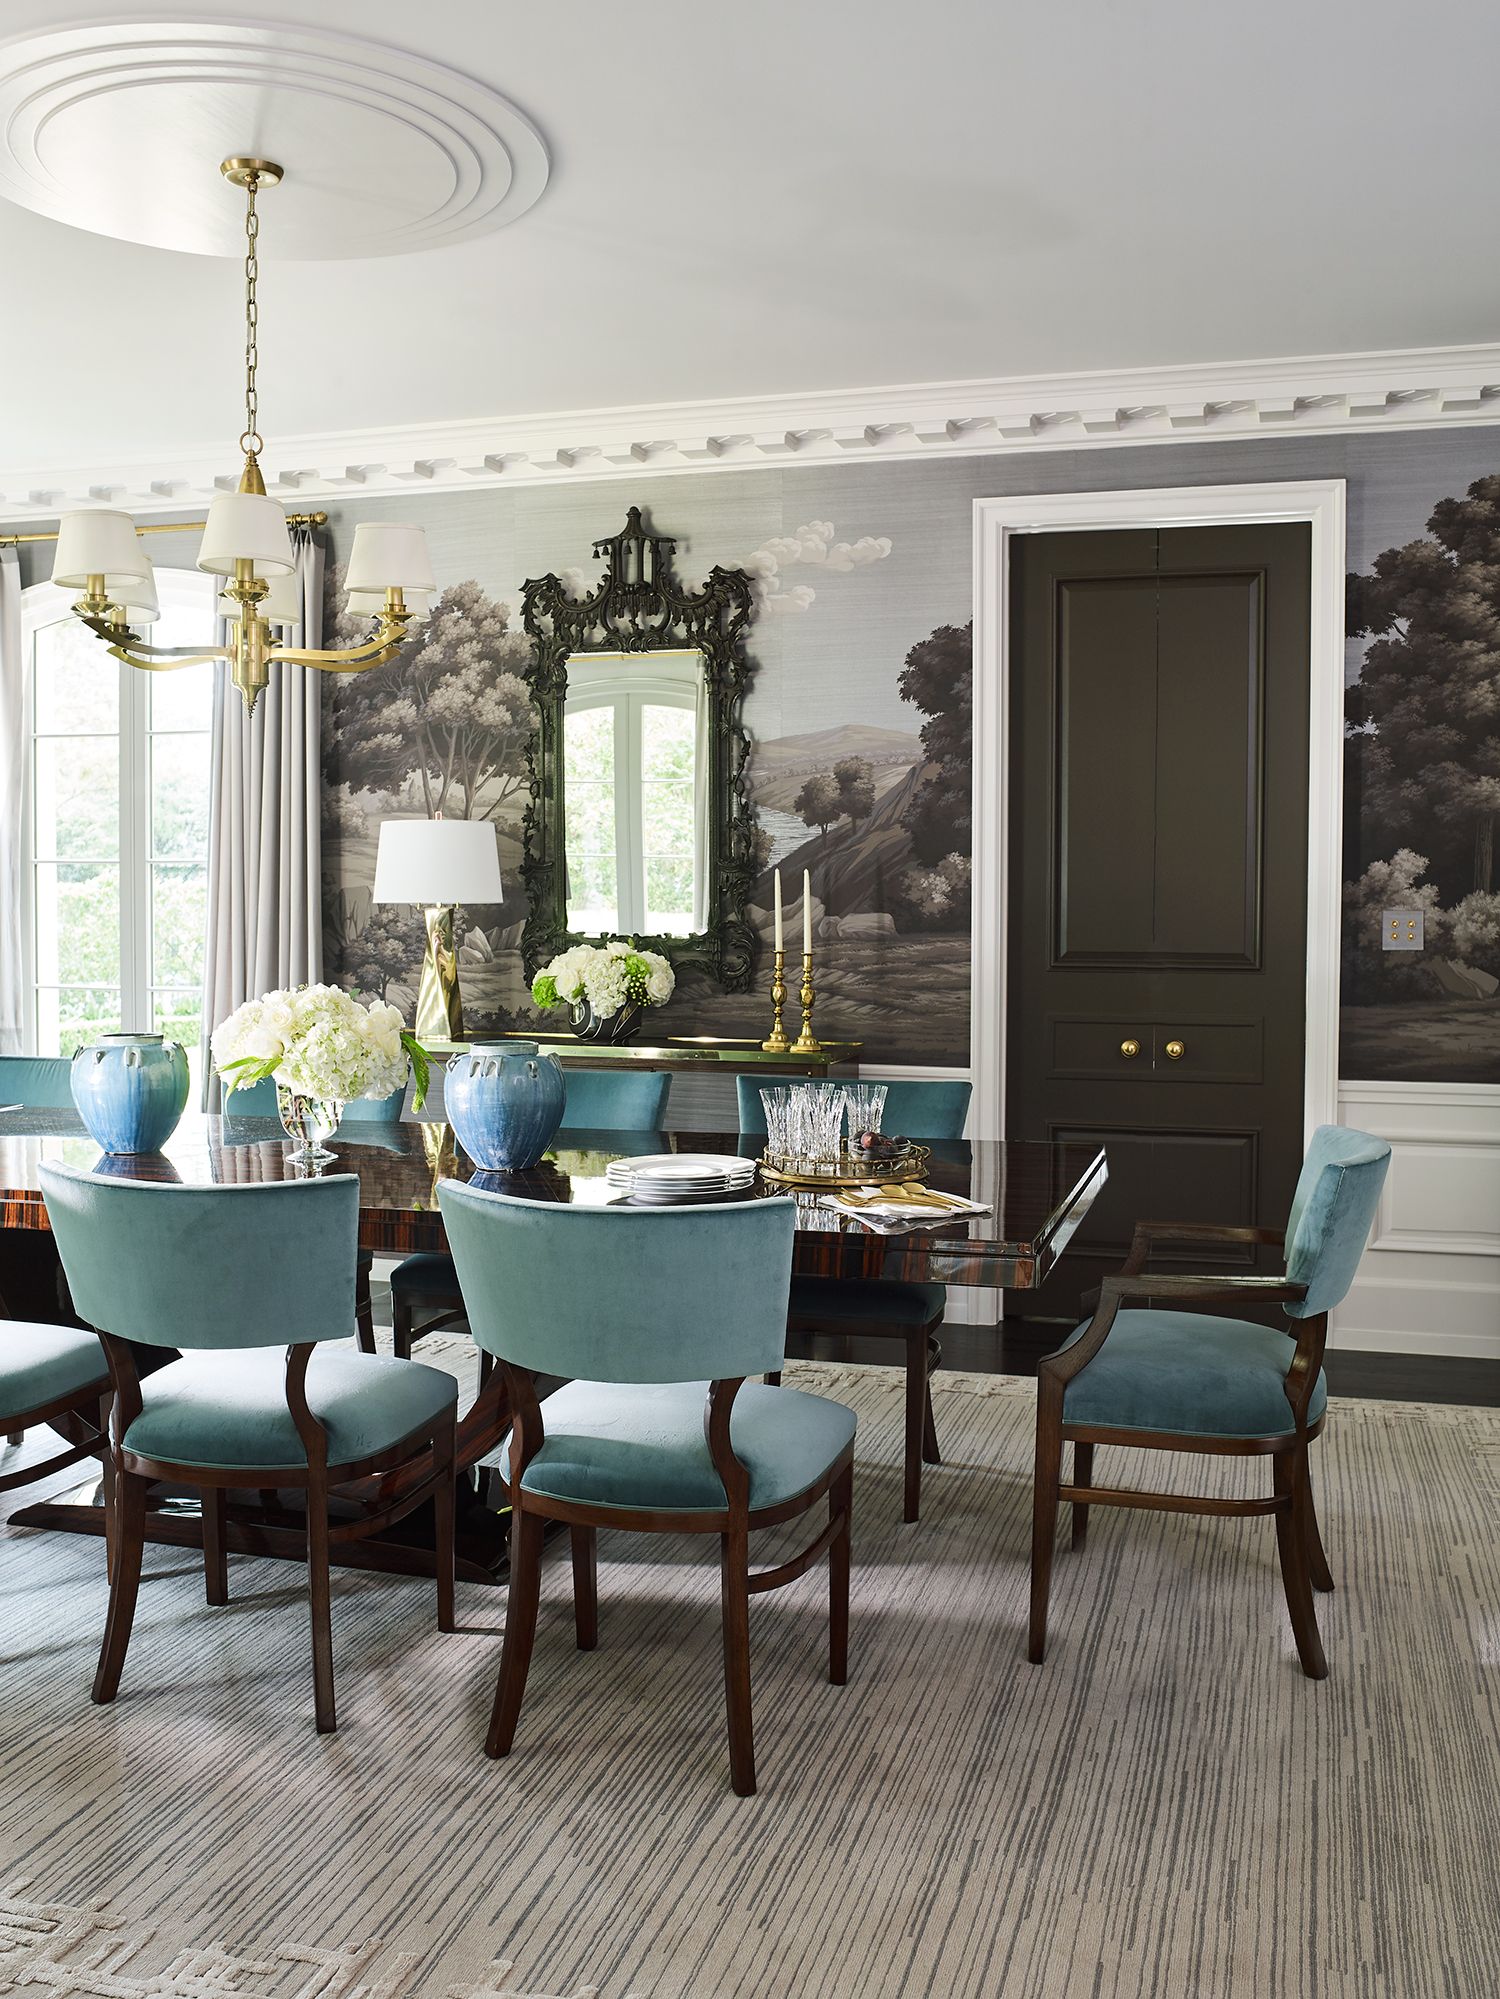 The Design Trends That Are In And Out, Dining Room Design Ideas 2020